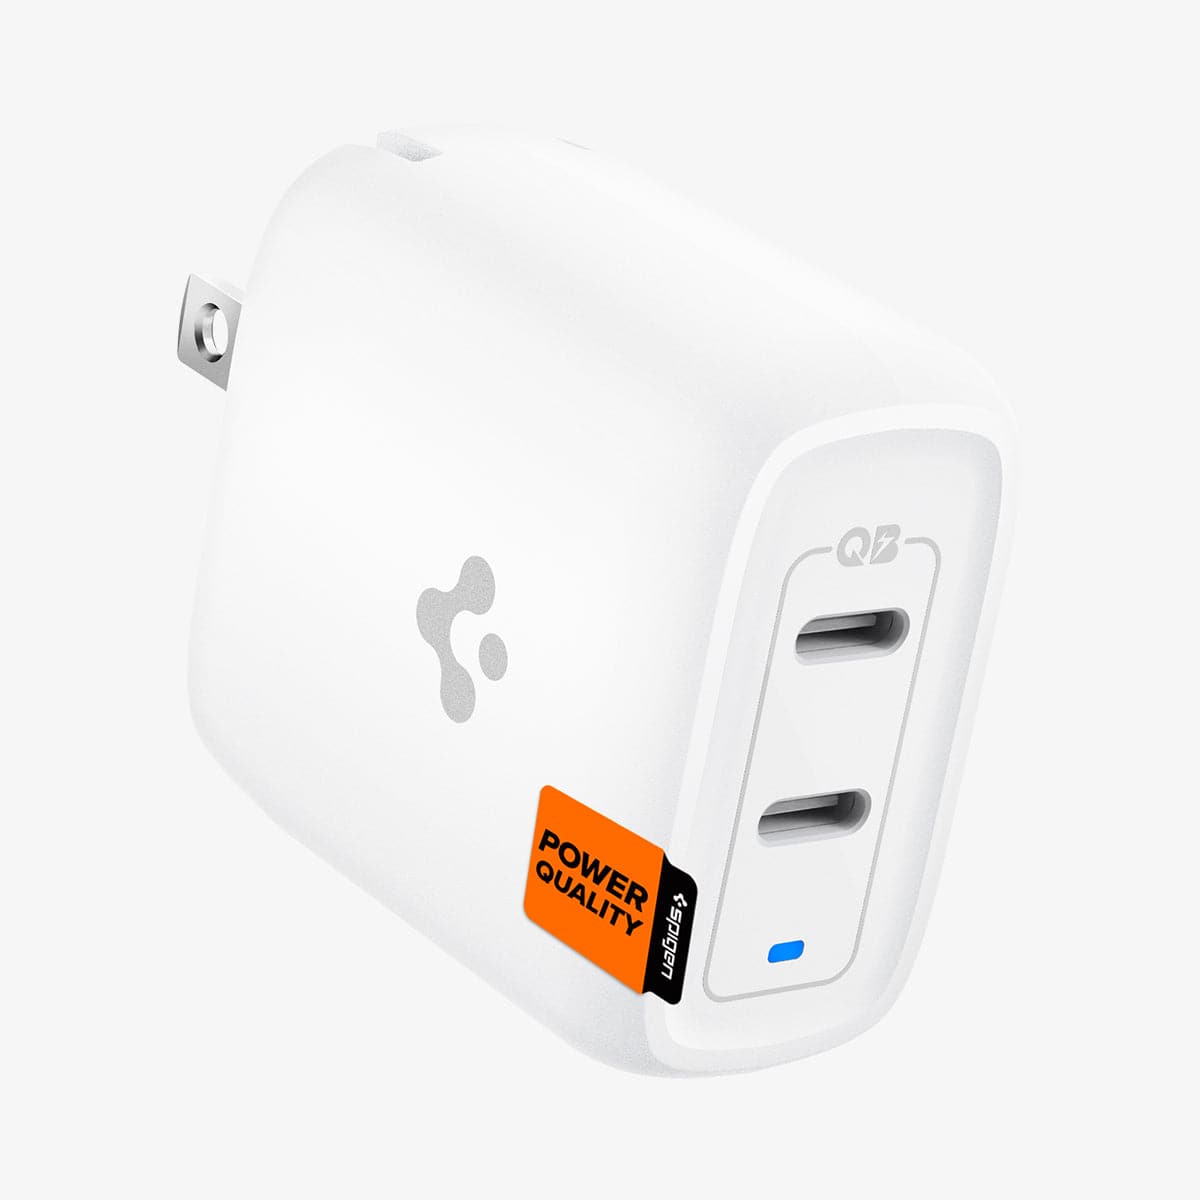 ACH02595 - ArcStation™ Pro 40W Wall Charger PE2013 in white showing the front, side and top